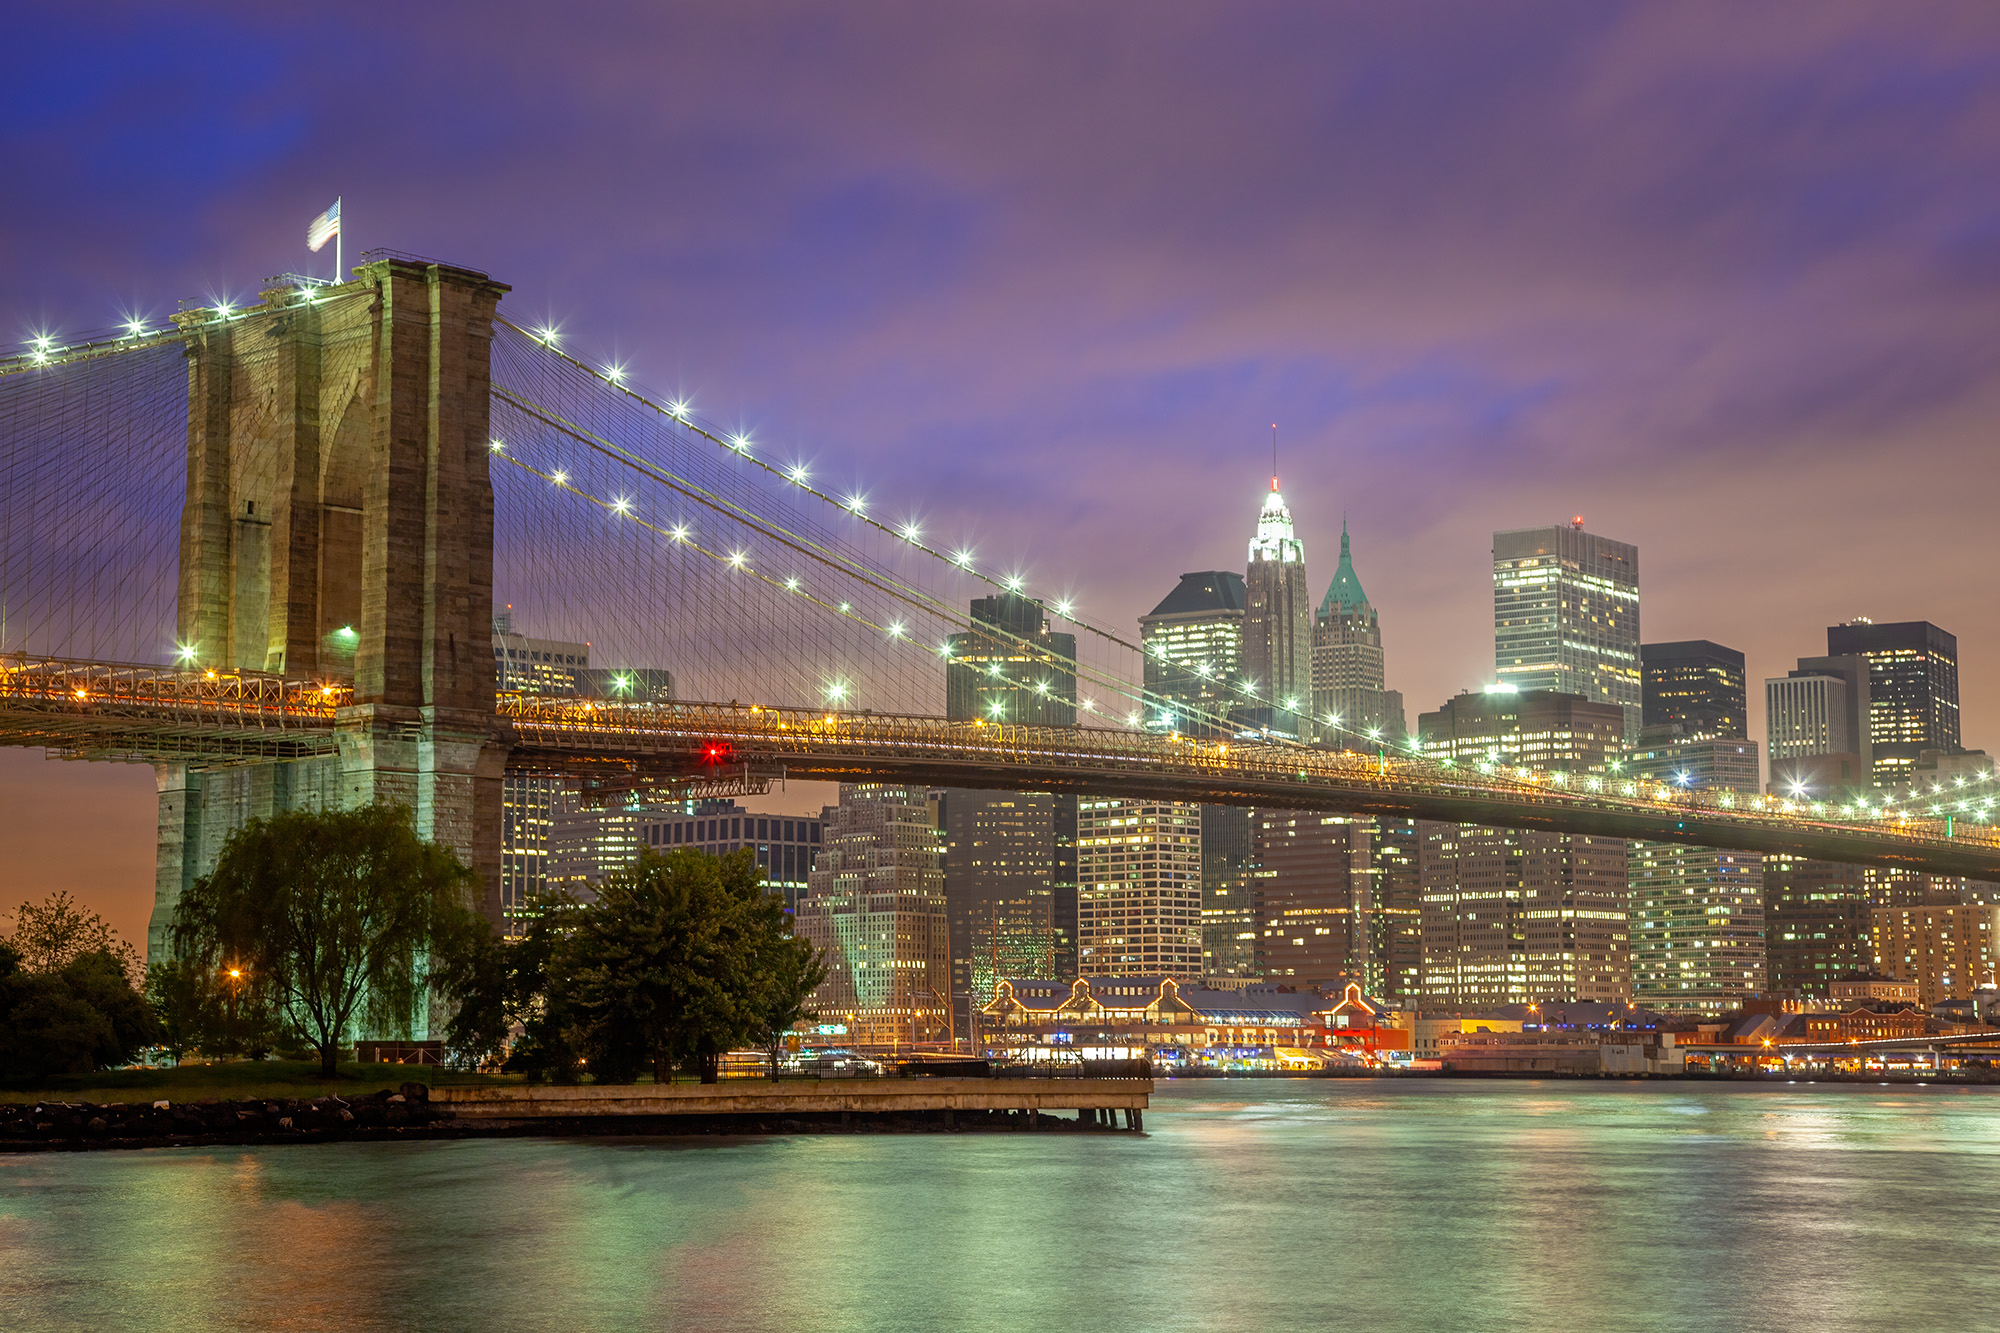 This image captures the Brooklyn Bridge during the enchanting blue hour, spanning the East River from Brooklyn to Manhattan....